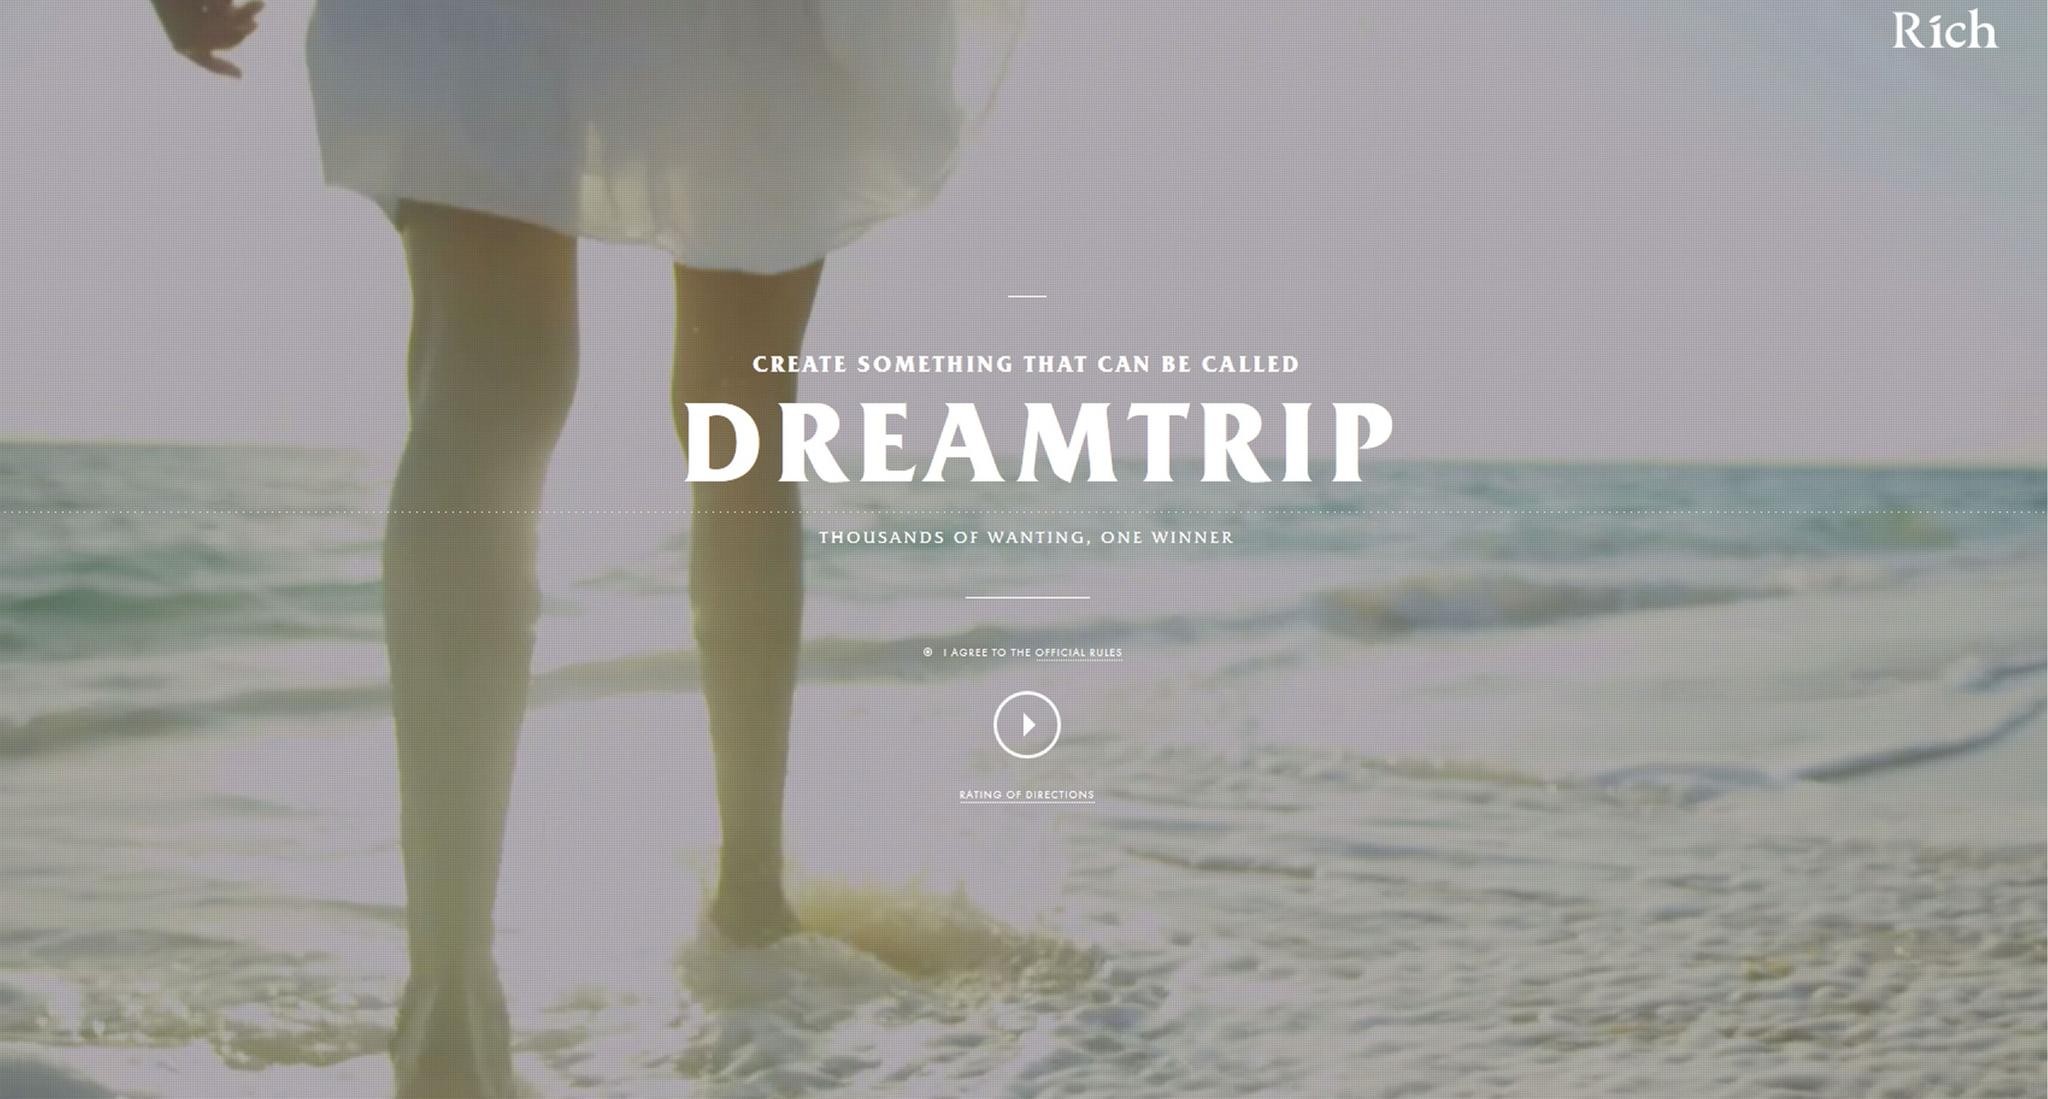 DREAMTRIP. THOUSANDS OF WANTING, ONE WINNER